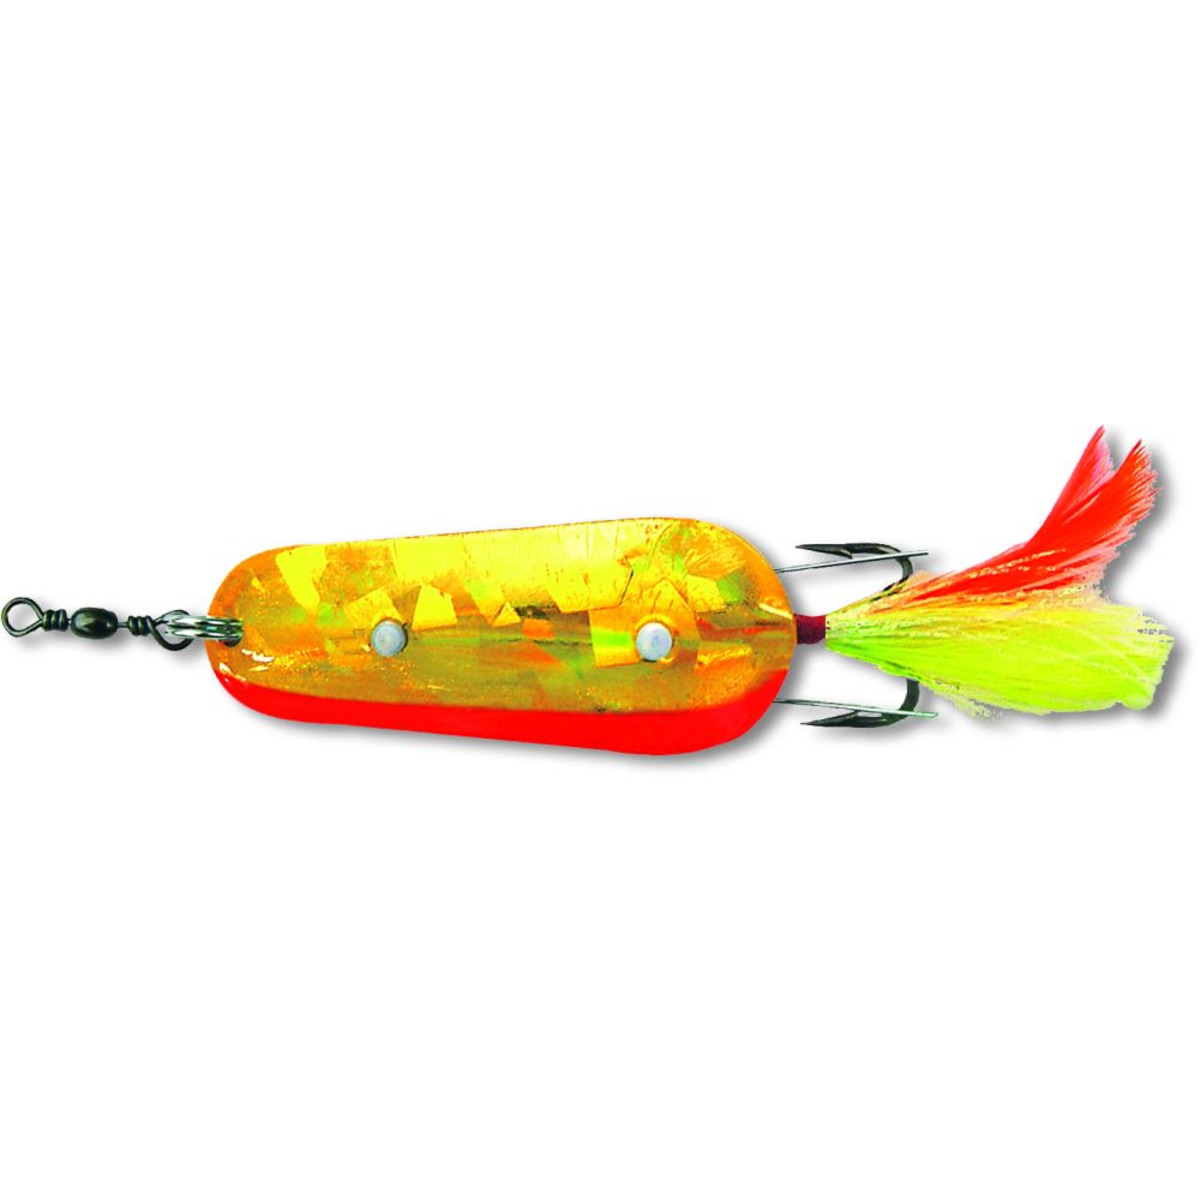 Zebco Weedy - 16 g - red/chartreuse